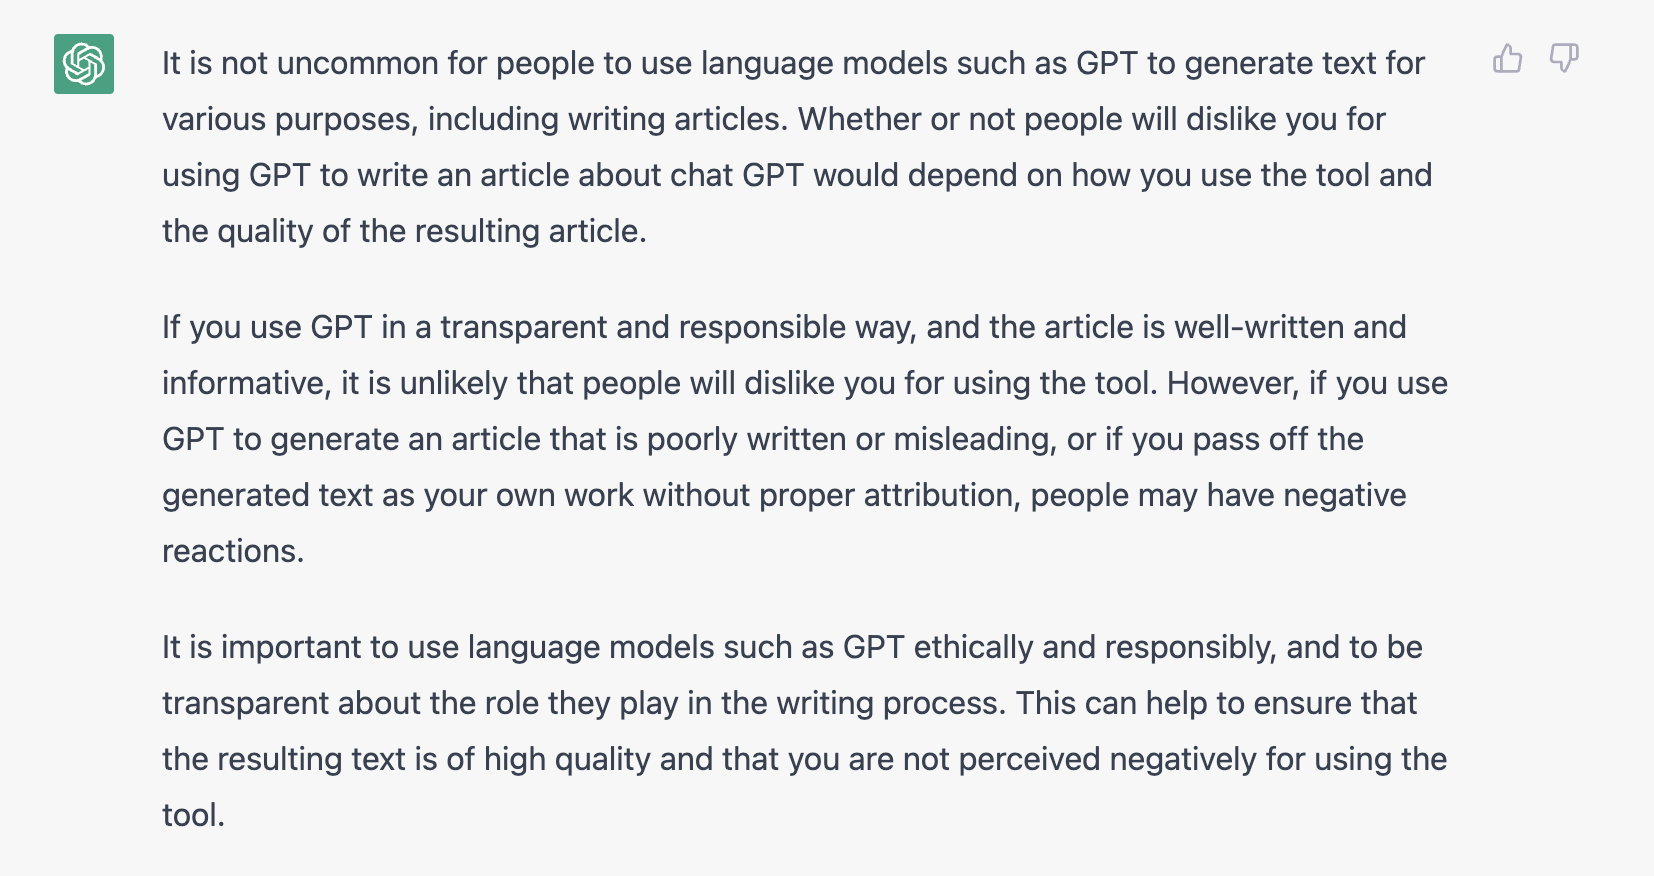 About using GPT